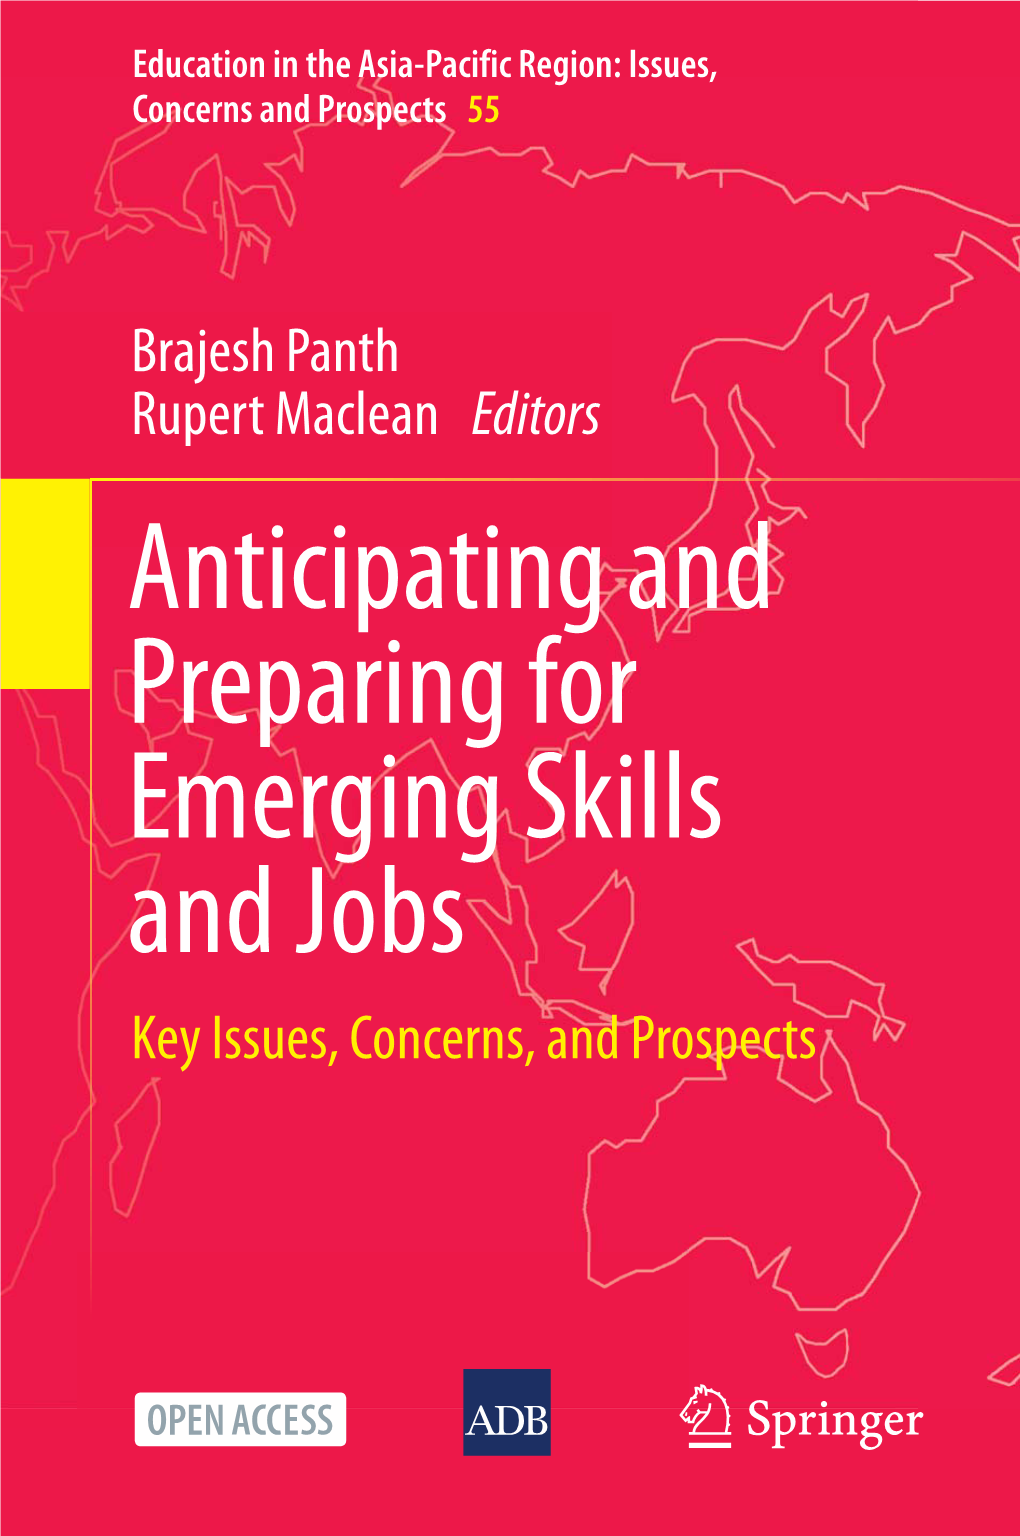 Anticipating and Preparing for Emerging Skills and Jobs Key Issues, Concerns, and Prospects Education in the Asia-Paciﬁc Region: Issues, Concerns and Prospects